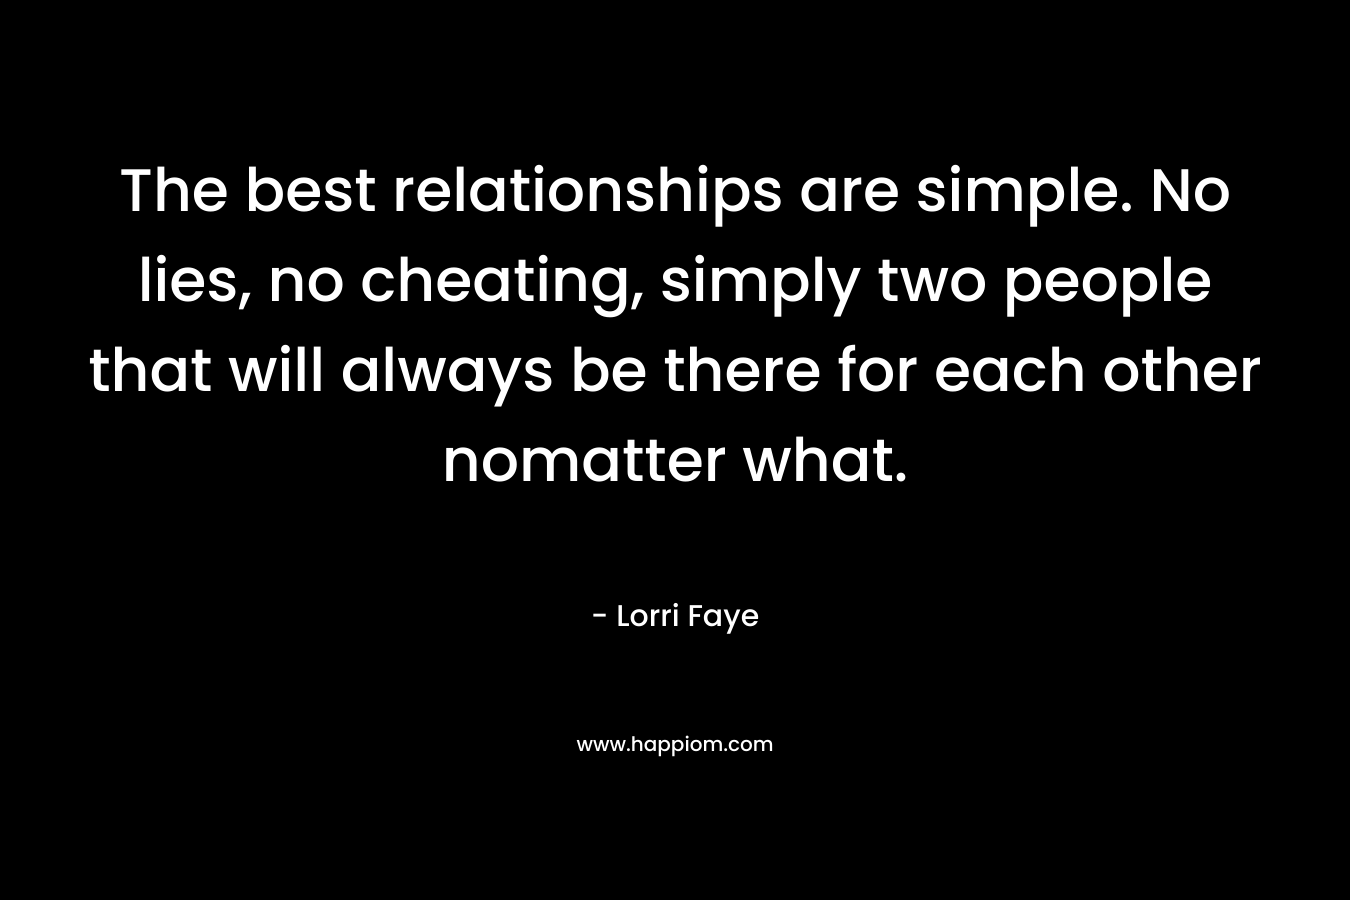 The best relationships are simple. No lies, no cheating, simply two people that will always be there for each other nomatter what.